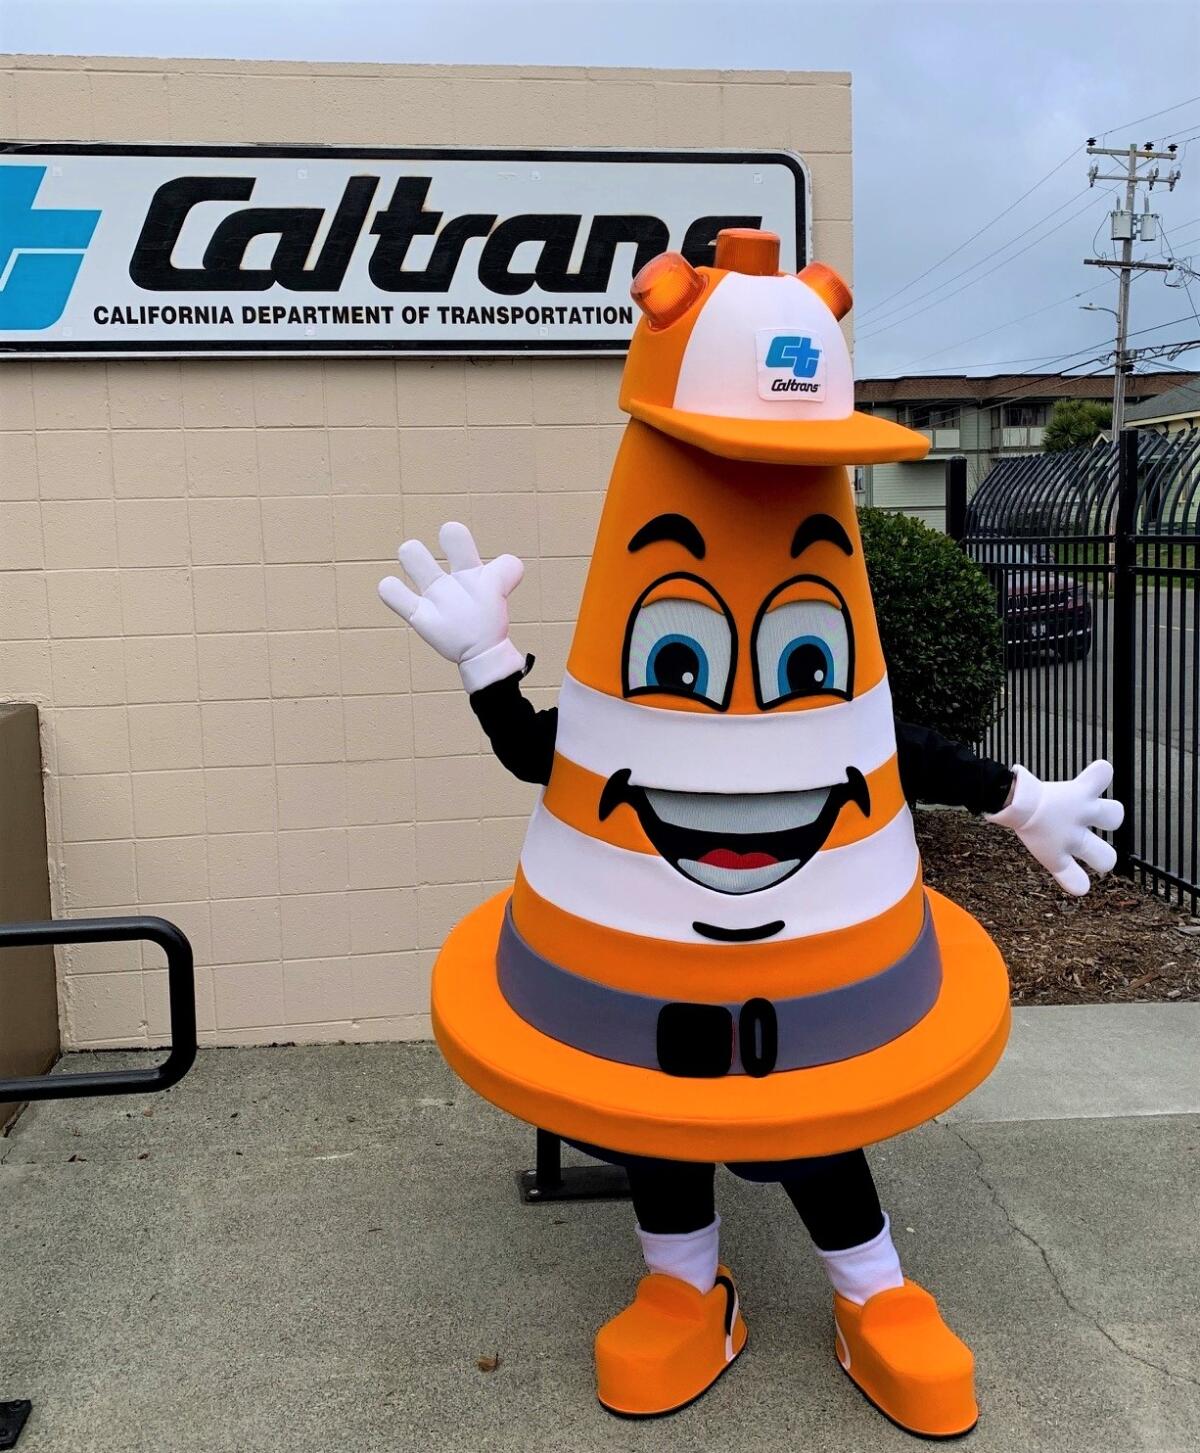 Safety Sam, a mascot created by Caltrans, will make appearances at public events and be an icon for traffic safety.